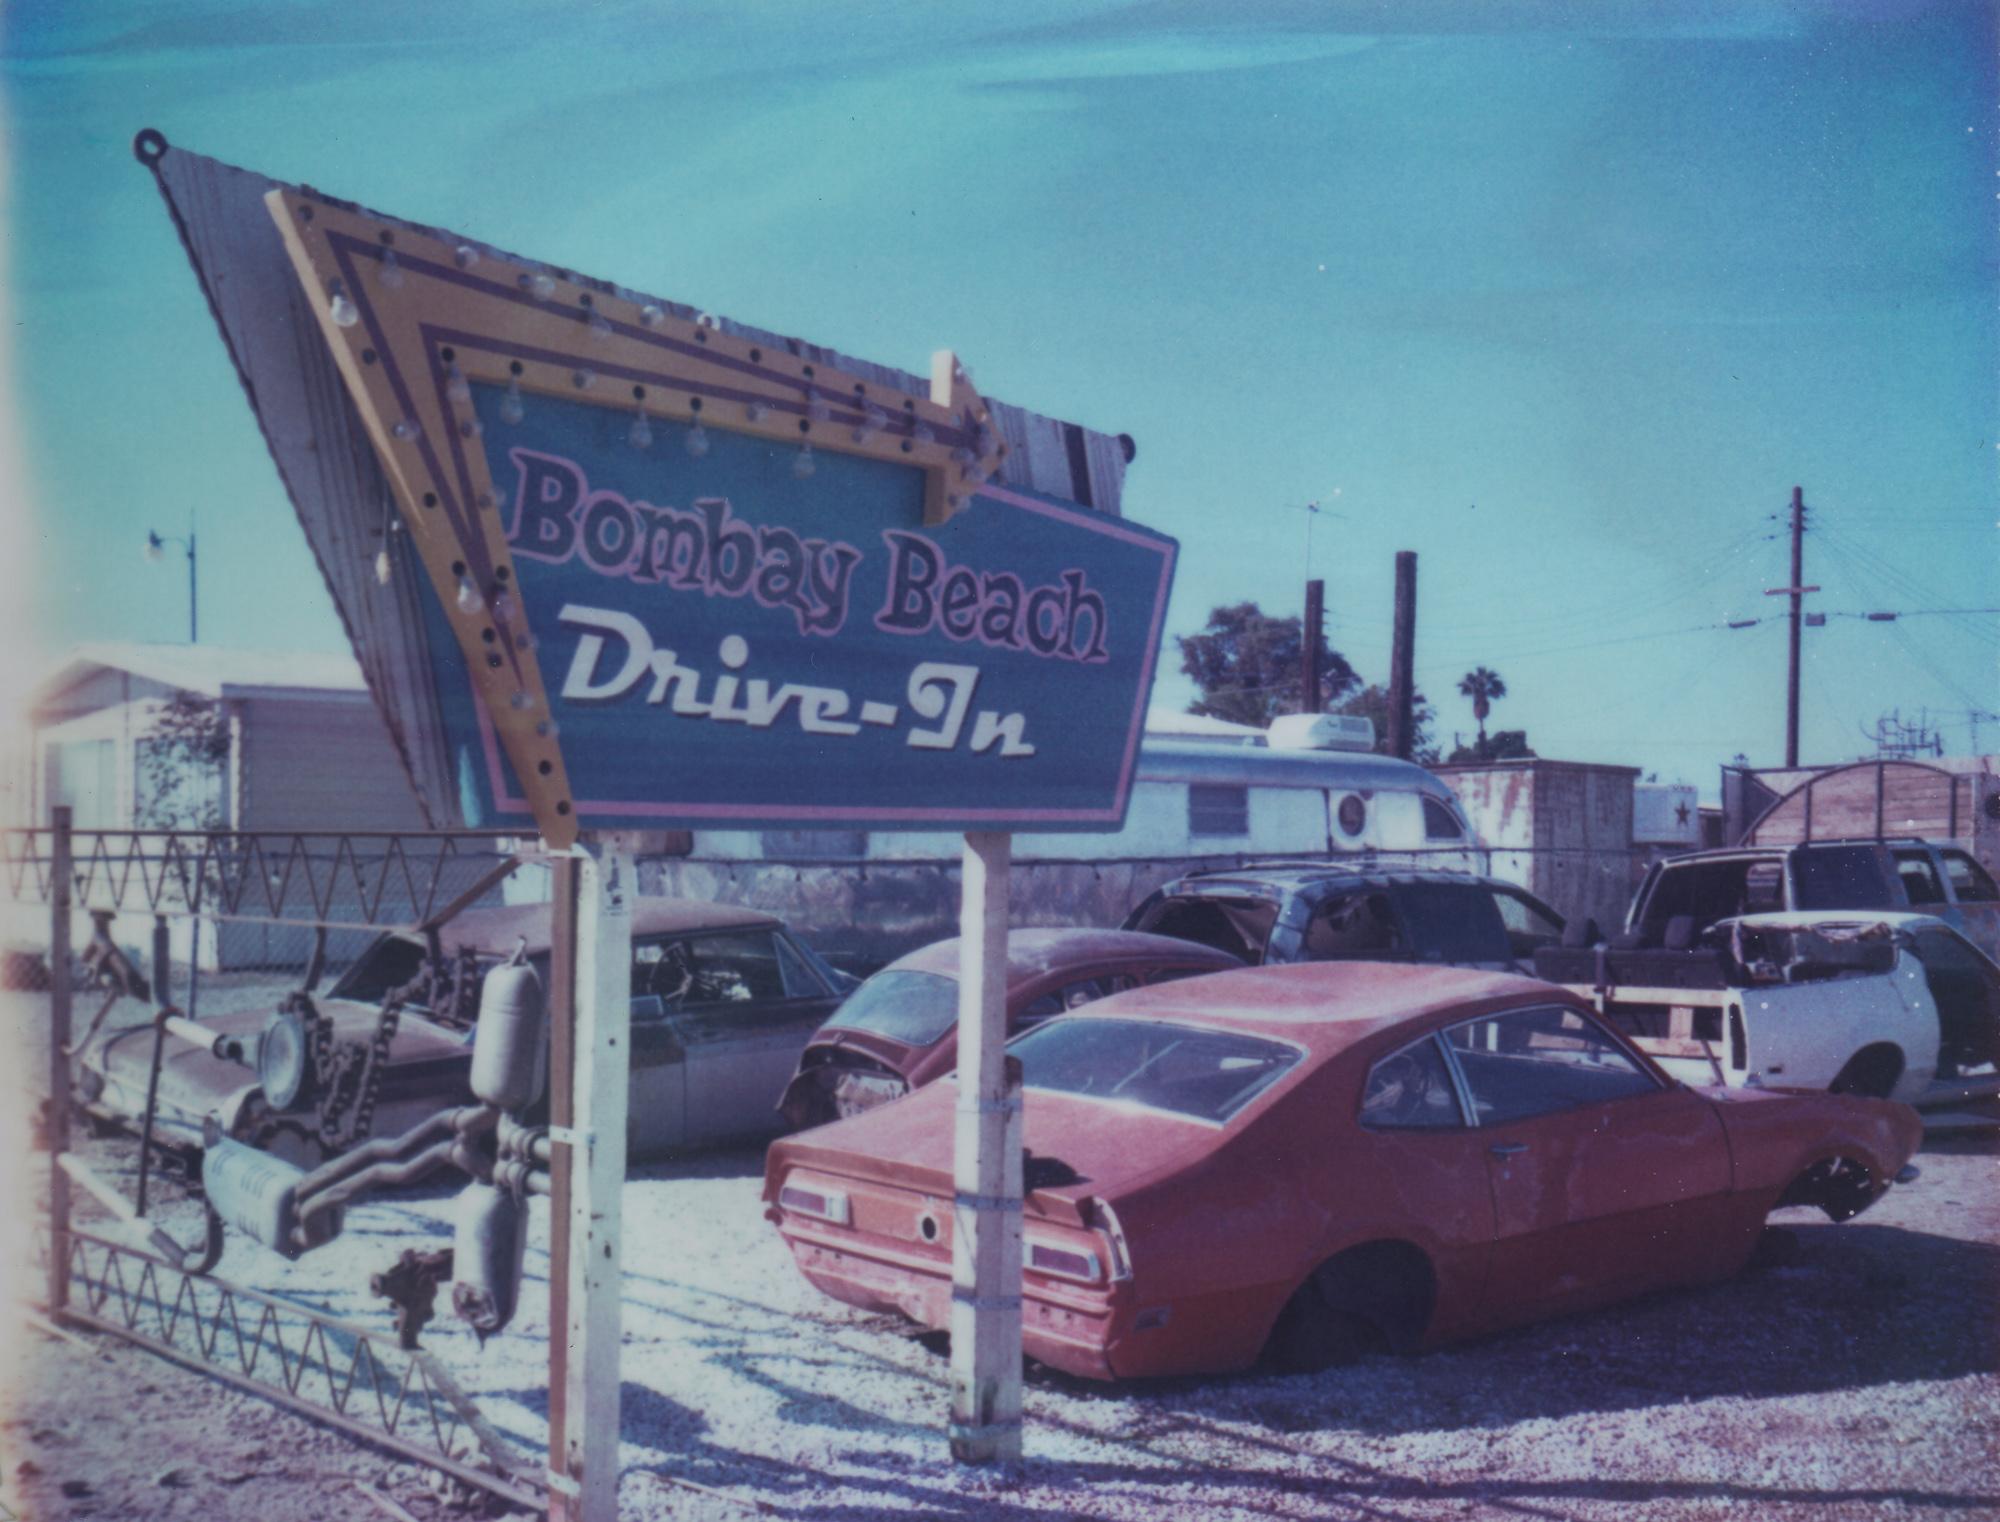 Drive-in (Bombay Beach), 2018, Edition 1/7 plus 2 Artist Proofs, based on an original Polaroid, Digital C-print, not mounted. Signed on the back and with certificate. Artist inventory PL2016-428.

Kirsten Thys van den Audenaerde is a self-taught